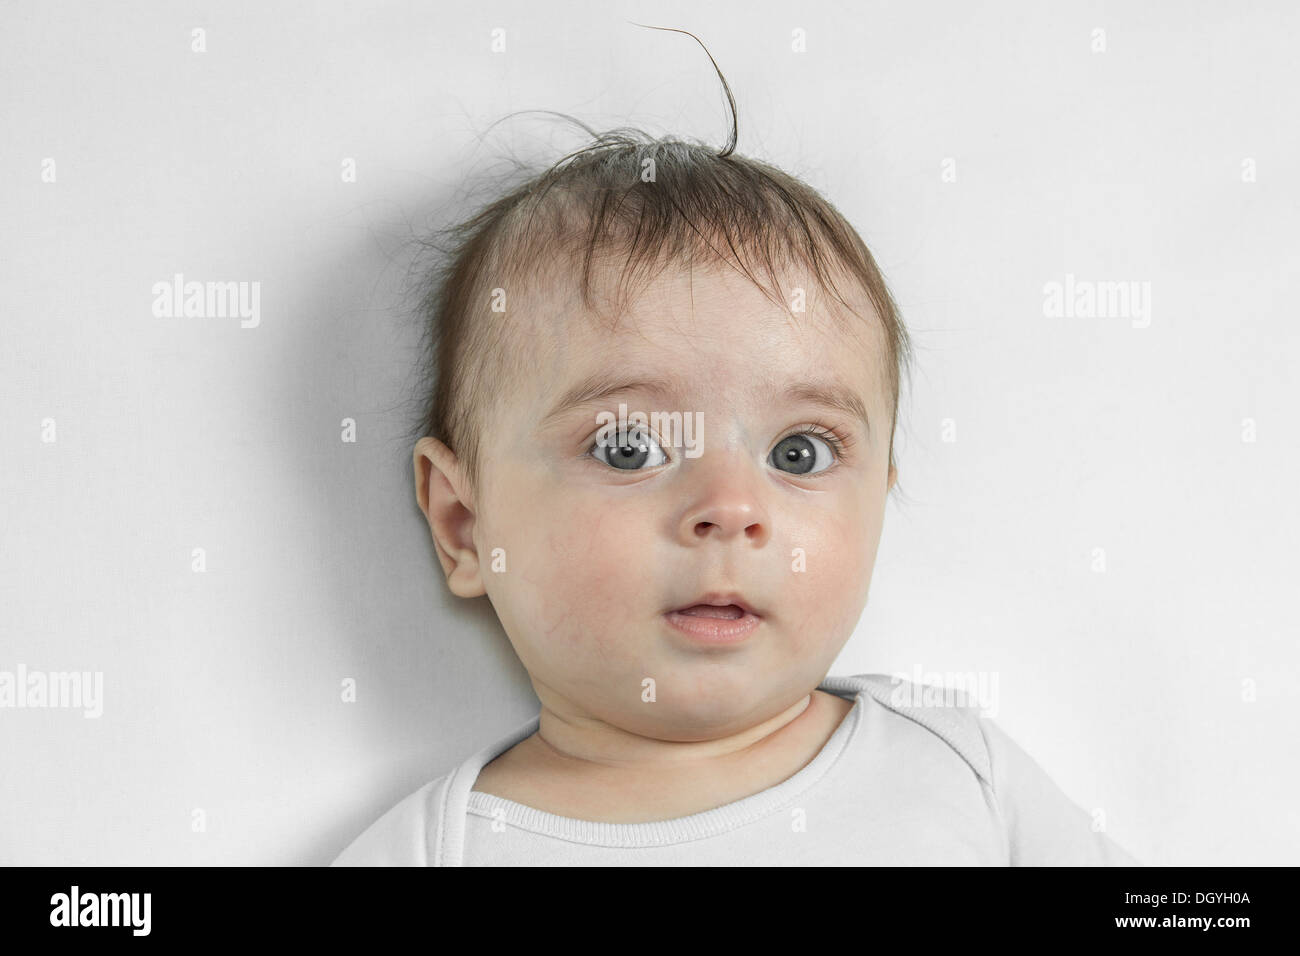 A baby boy looking contemplative, close-up Stock Photo